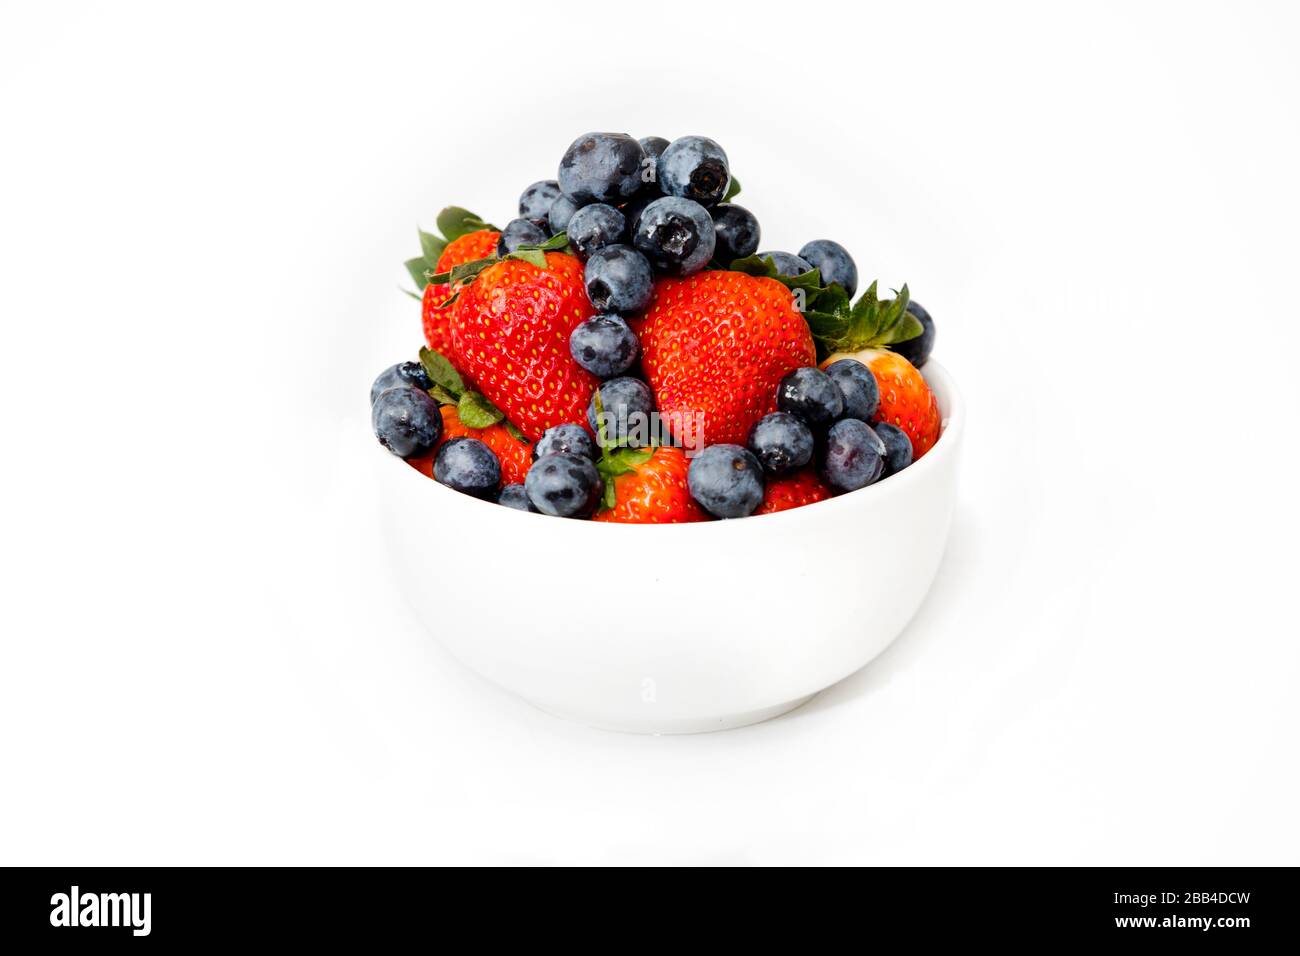 A white bowl full of delicious seasonal fruits, Blueberries, and Strawberries, mixed together. In a white background. For Healthy breakfast or snacks. Stock Photo